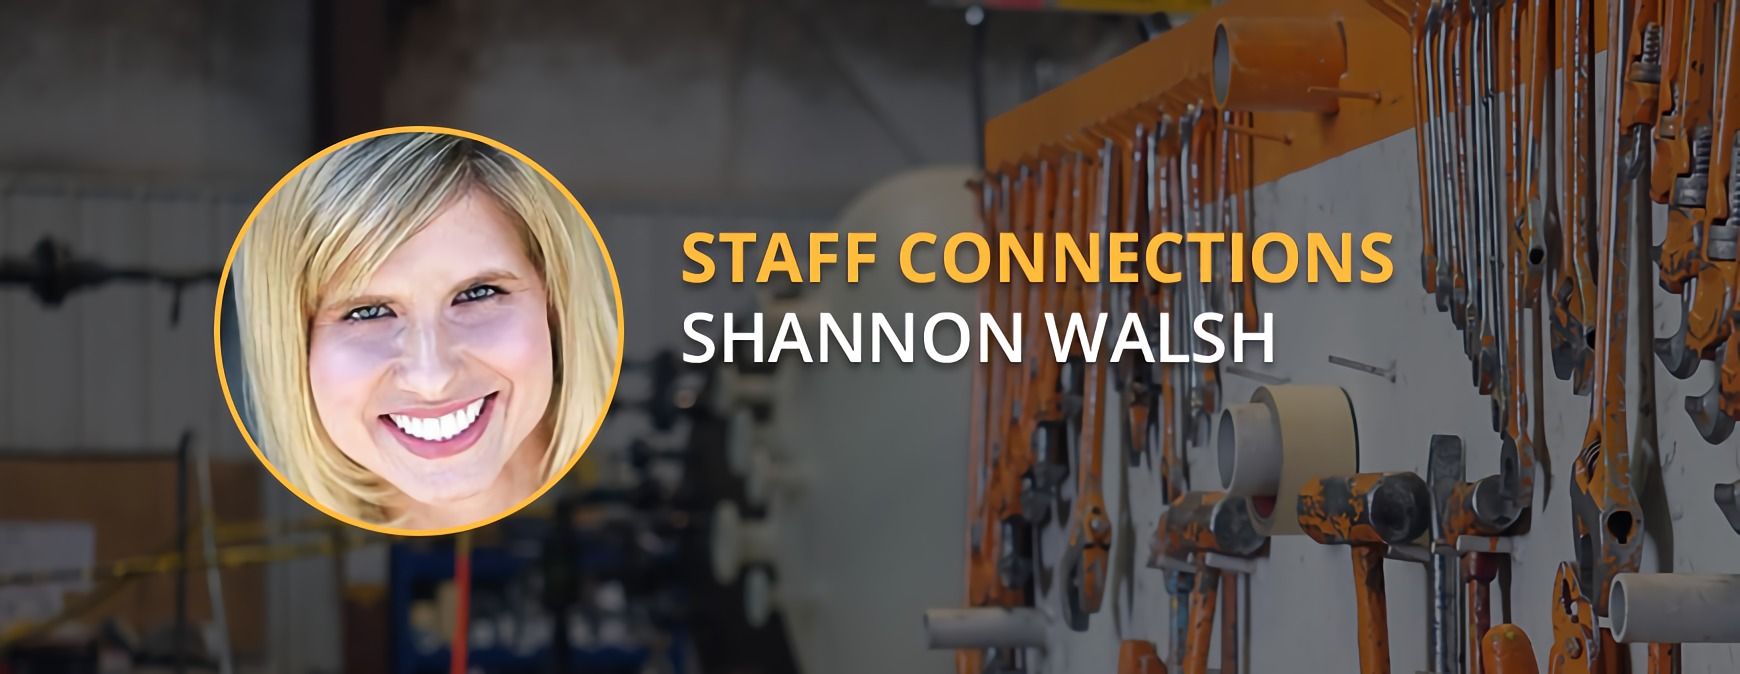 shannon walsh staff connections